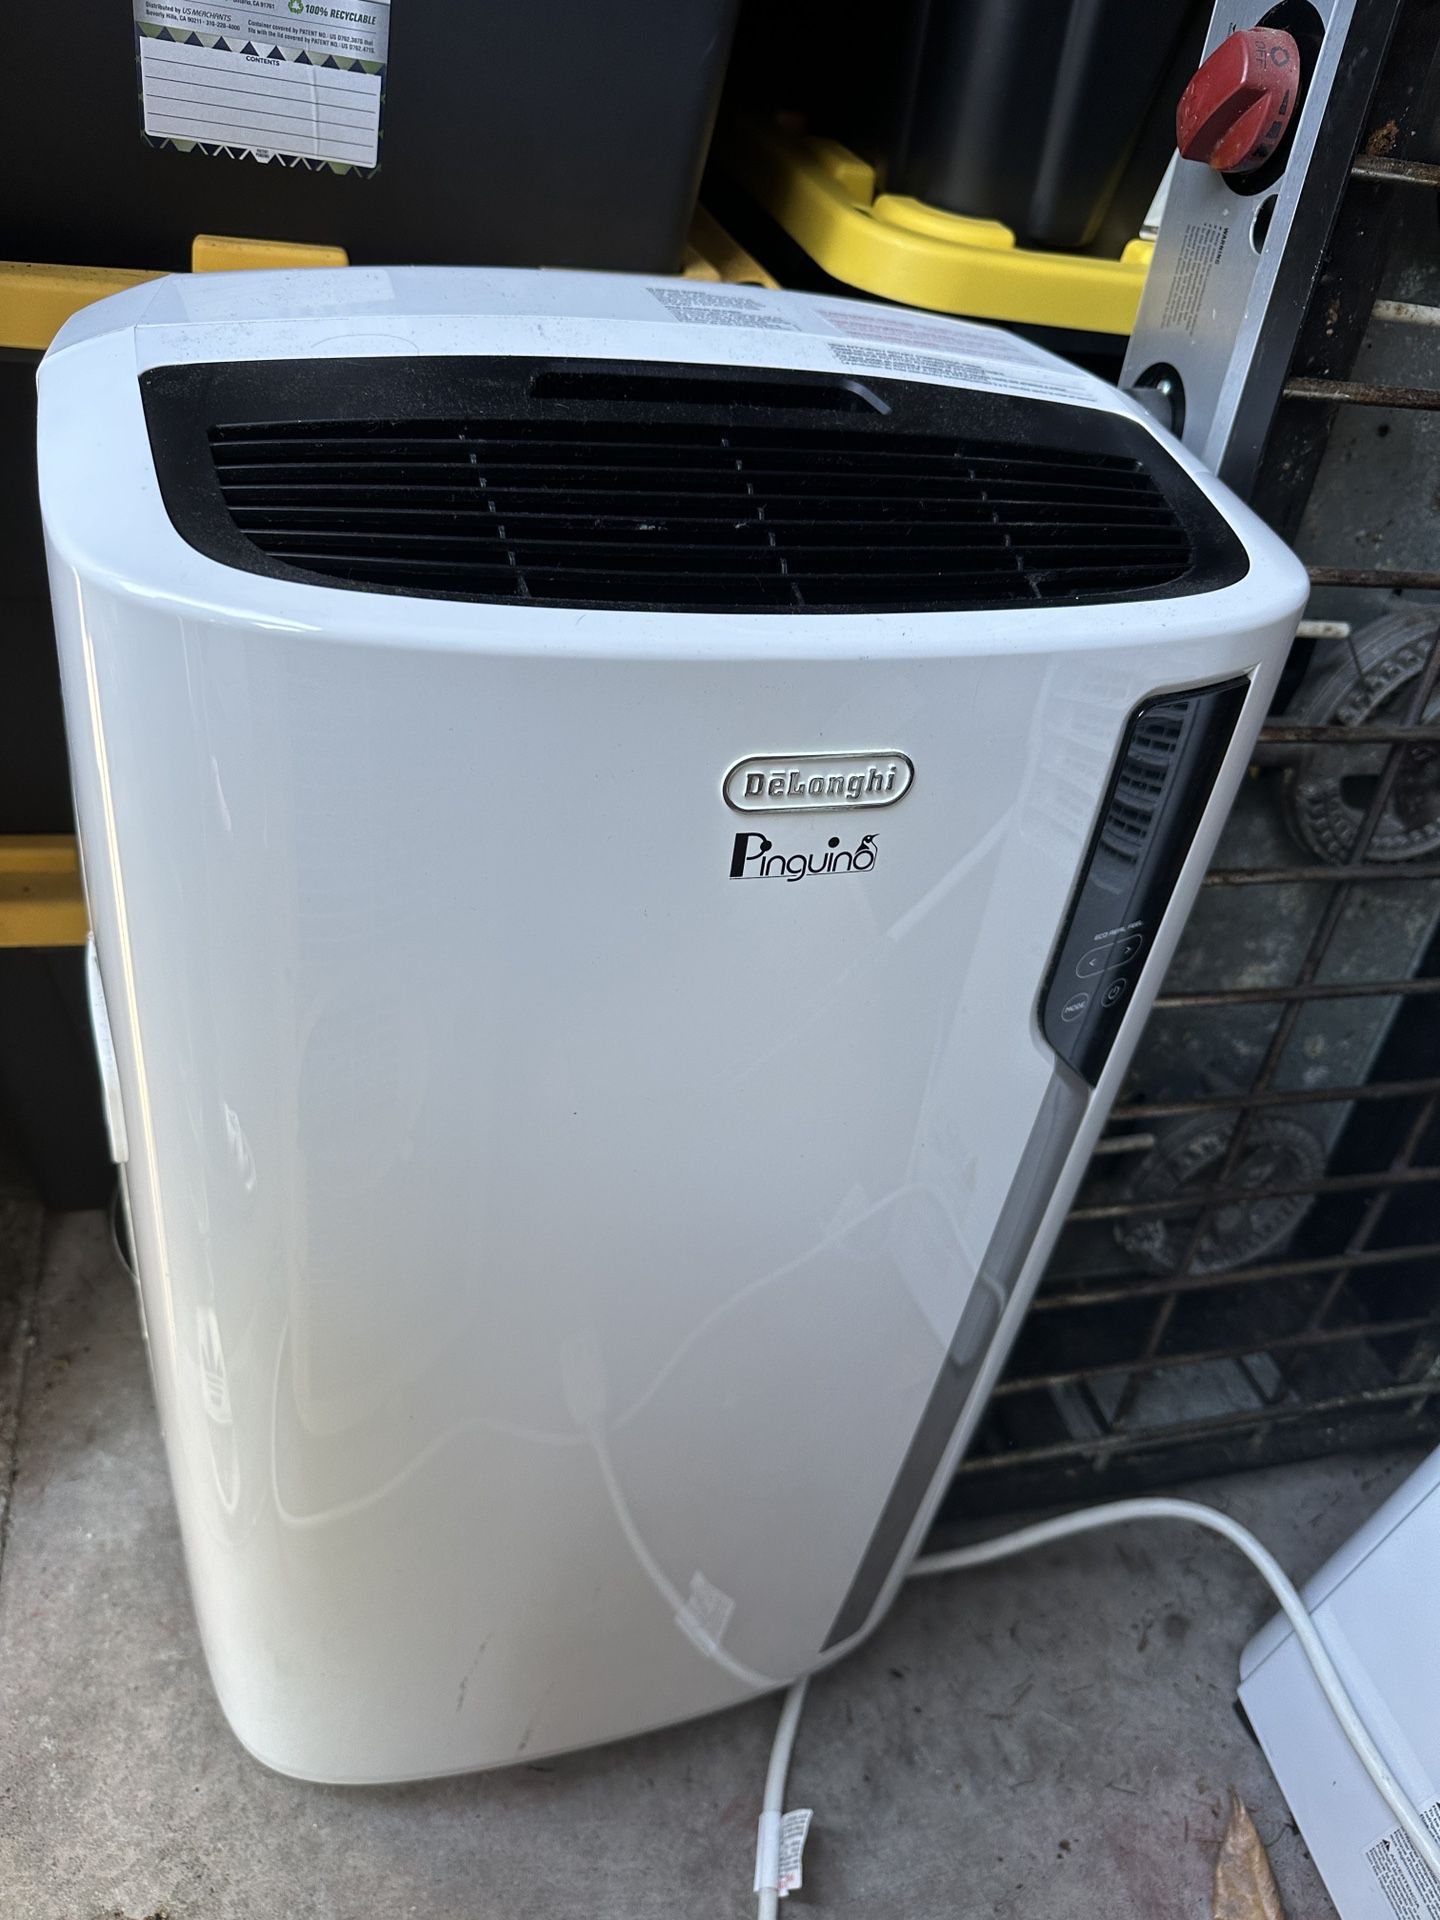 AC. Air-Conditioning And Dehumidifier.